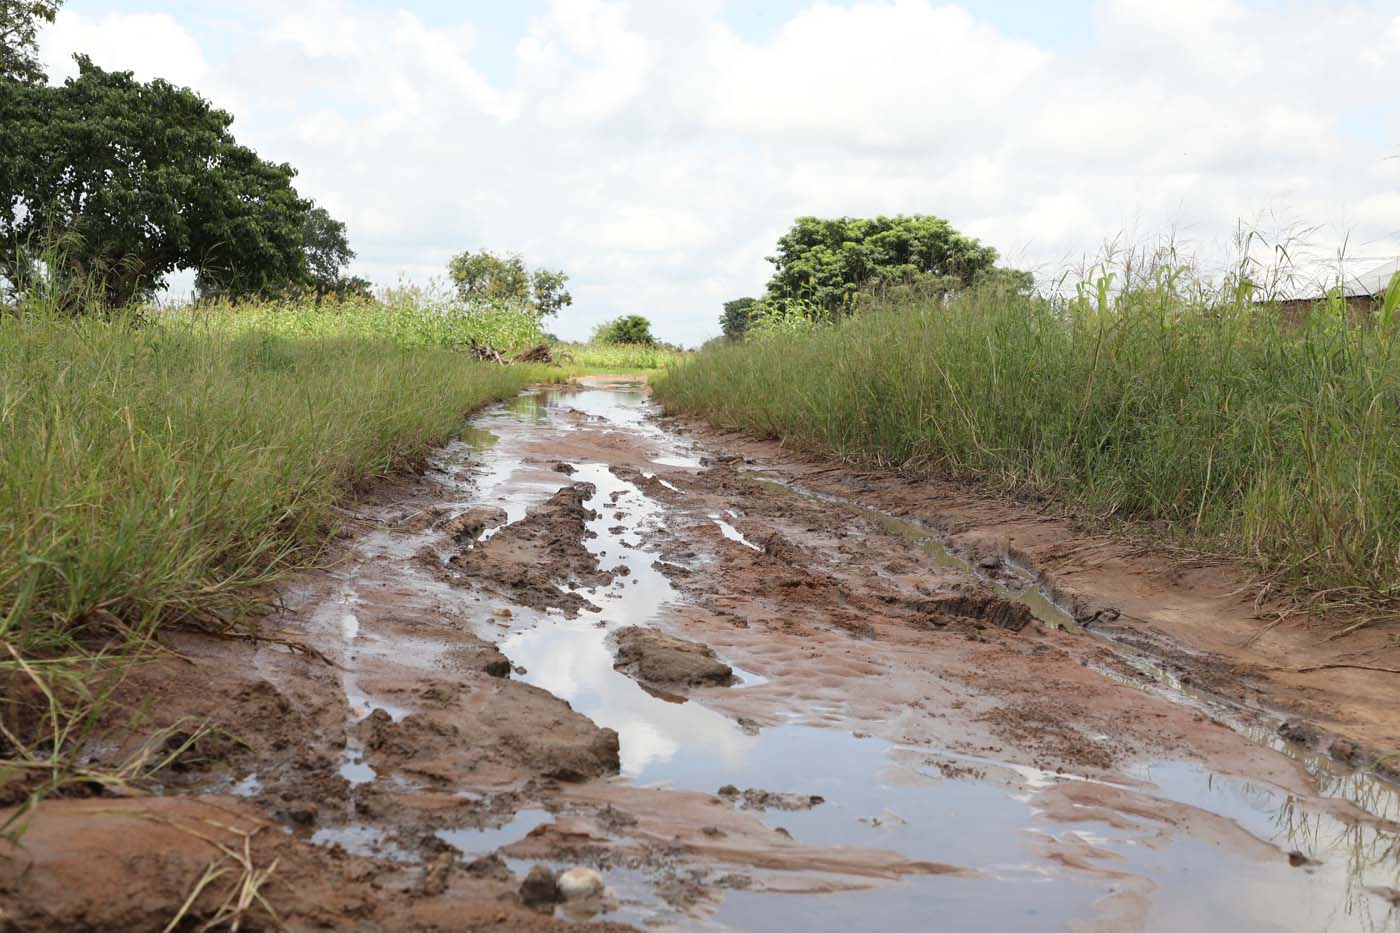 Roads between villages get washed out